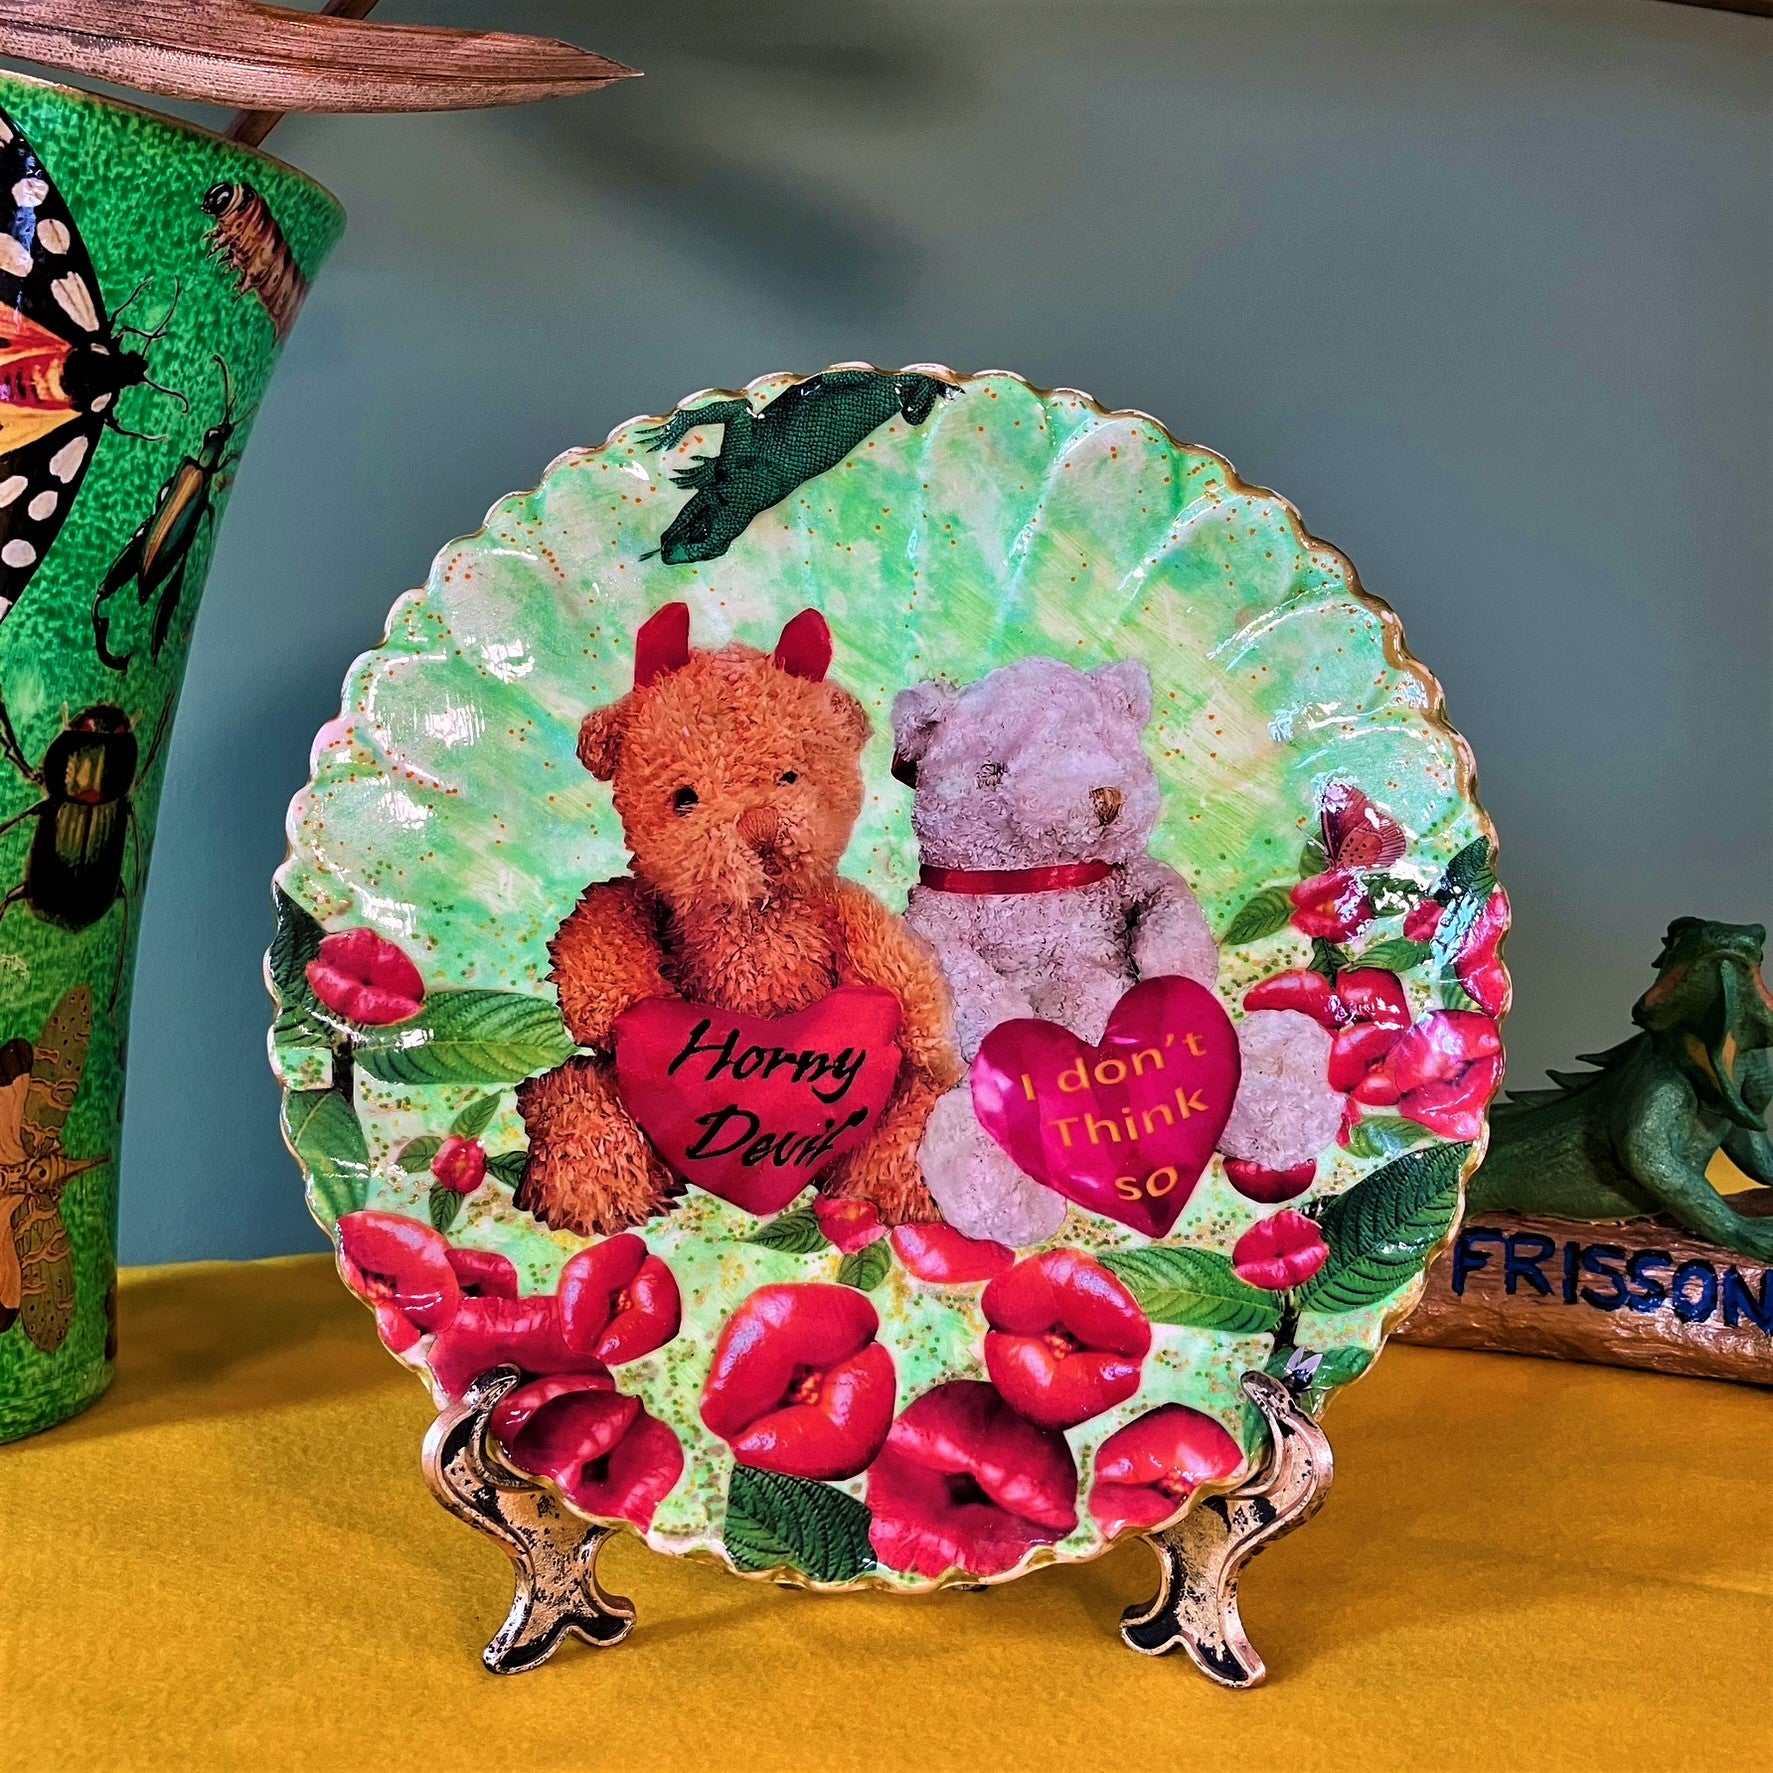 "Horny Devil. I Don't Think So" Wall Plate by House of Frisson, featuring a collage of two teddy bears holding hearts with messages, among lip-shaped flowers, on a green background. Plate on a plate stand, resting on a table.